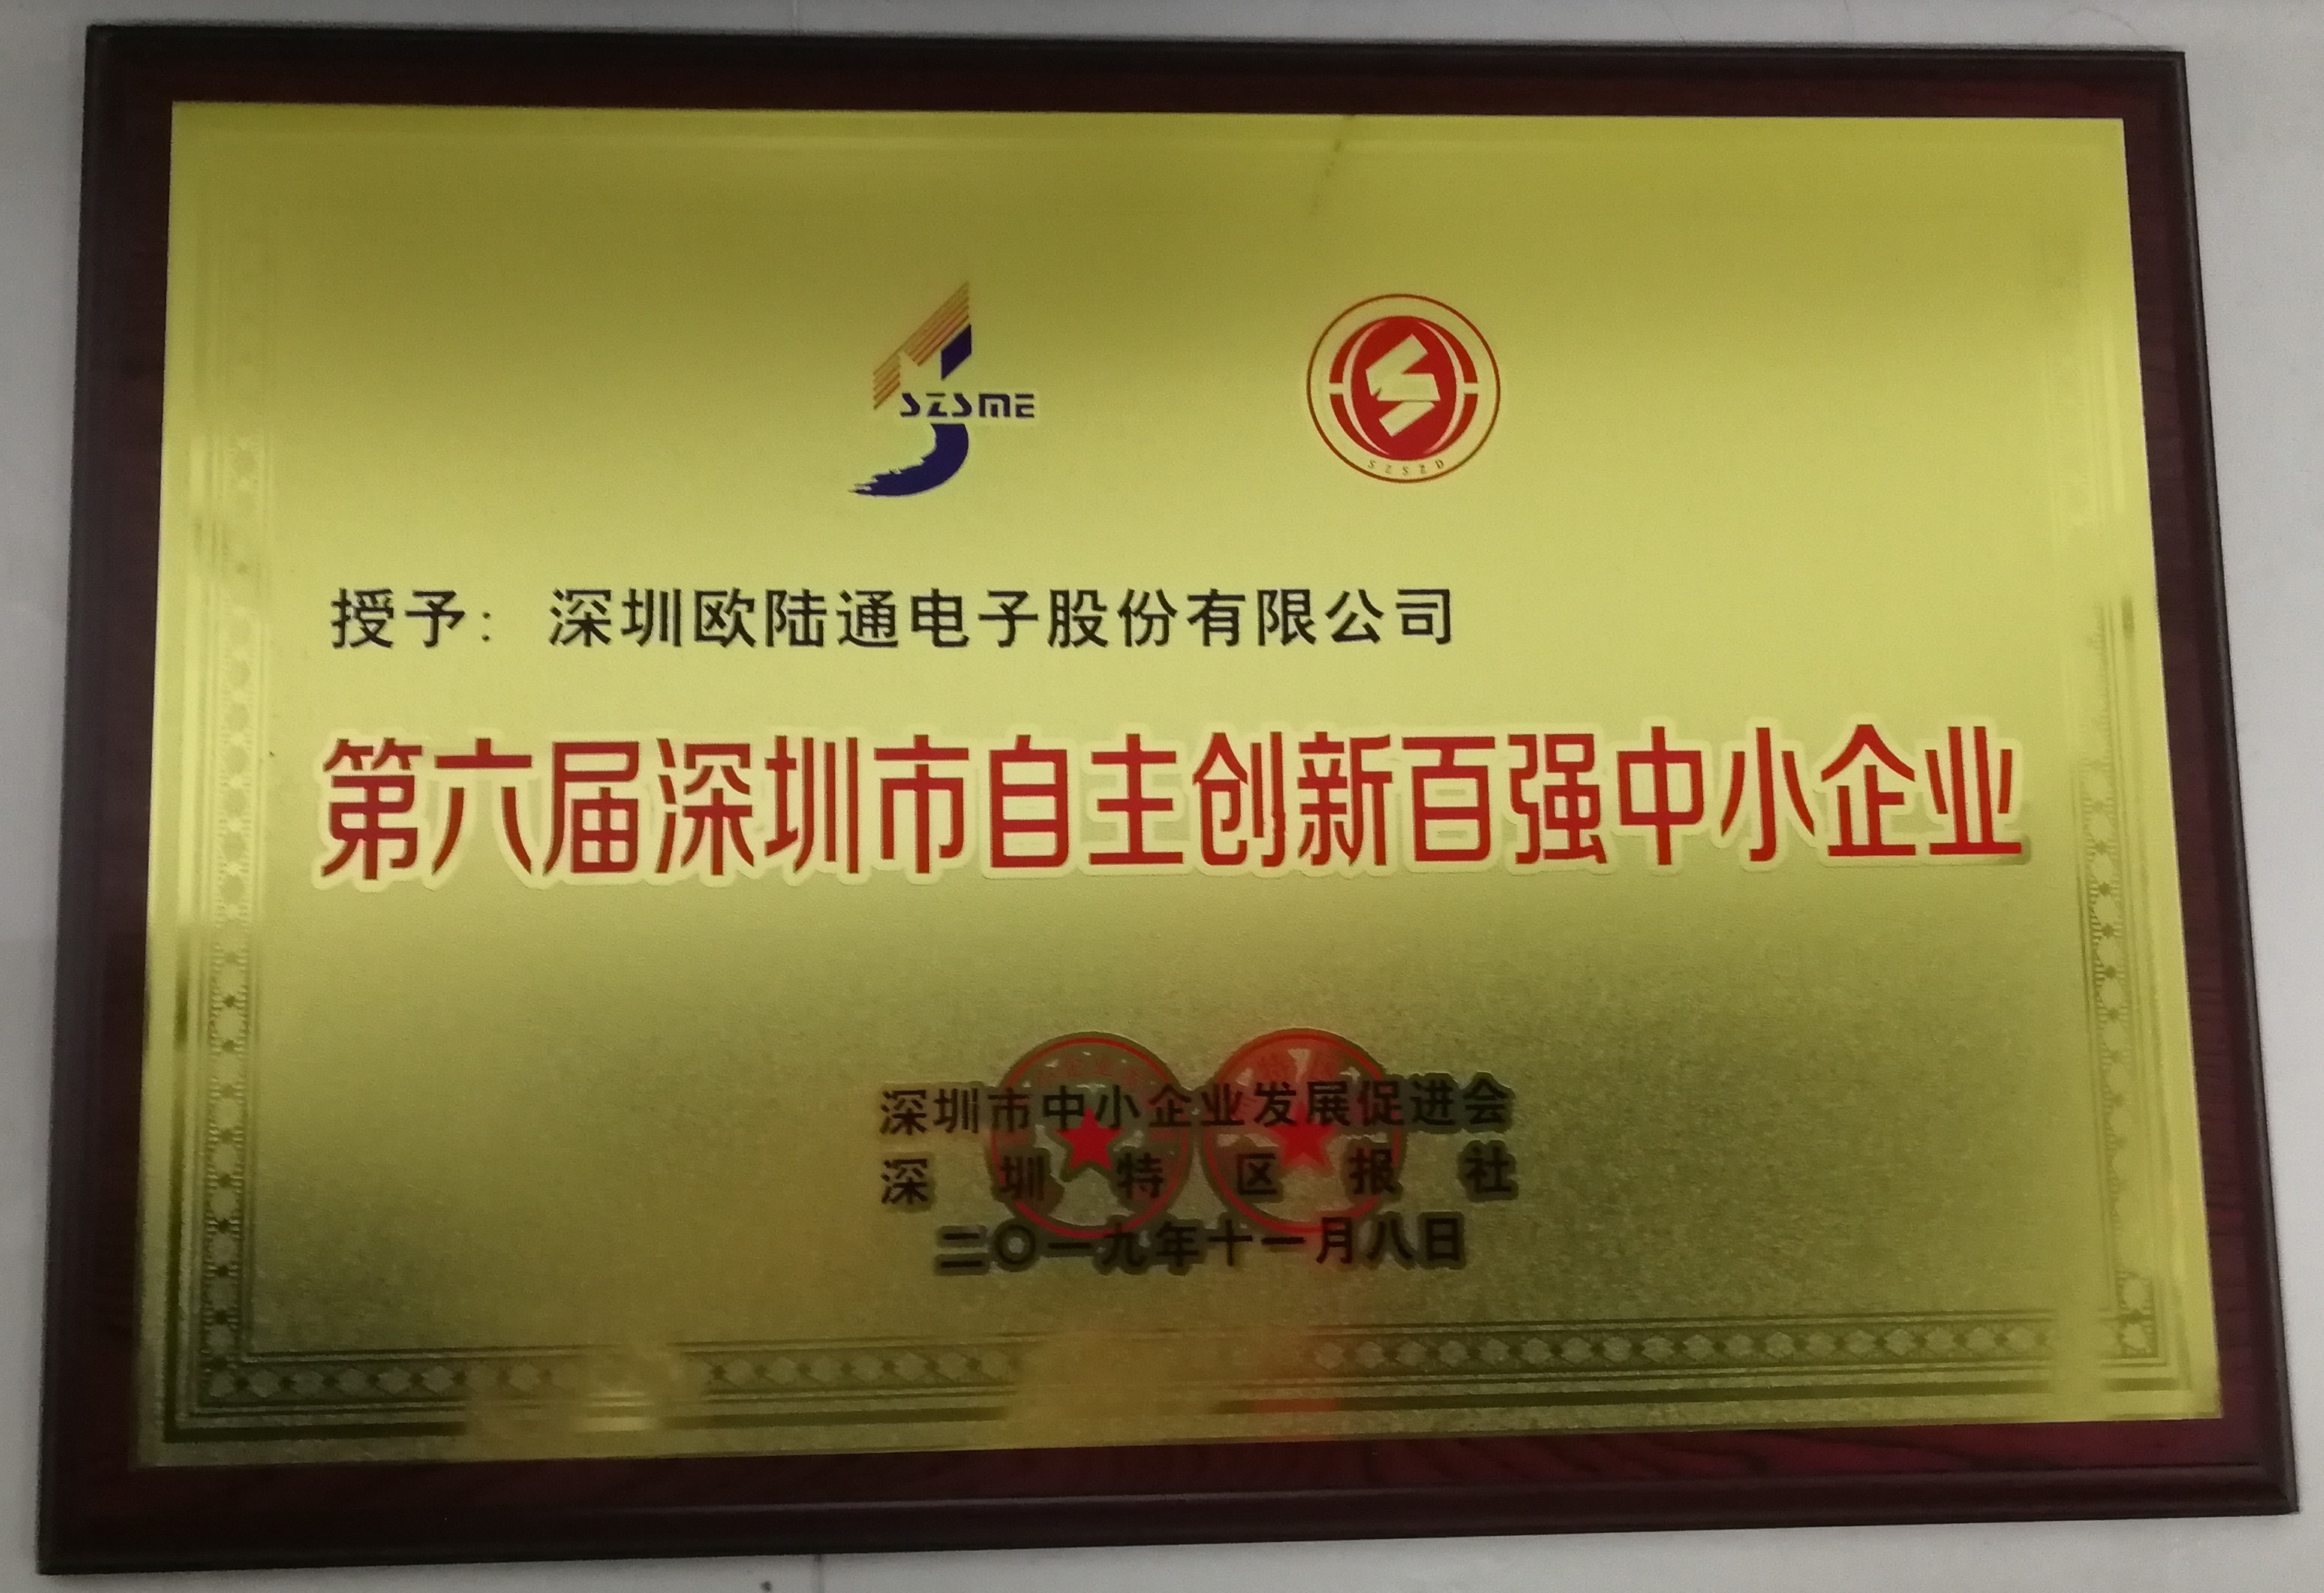 The 6th Shenzhen Top 100 Independent Innovation SMEs